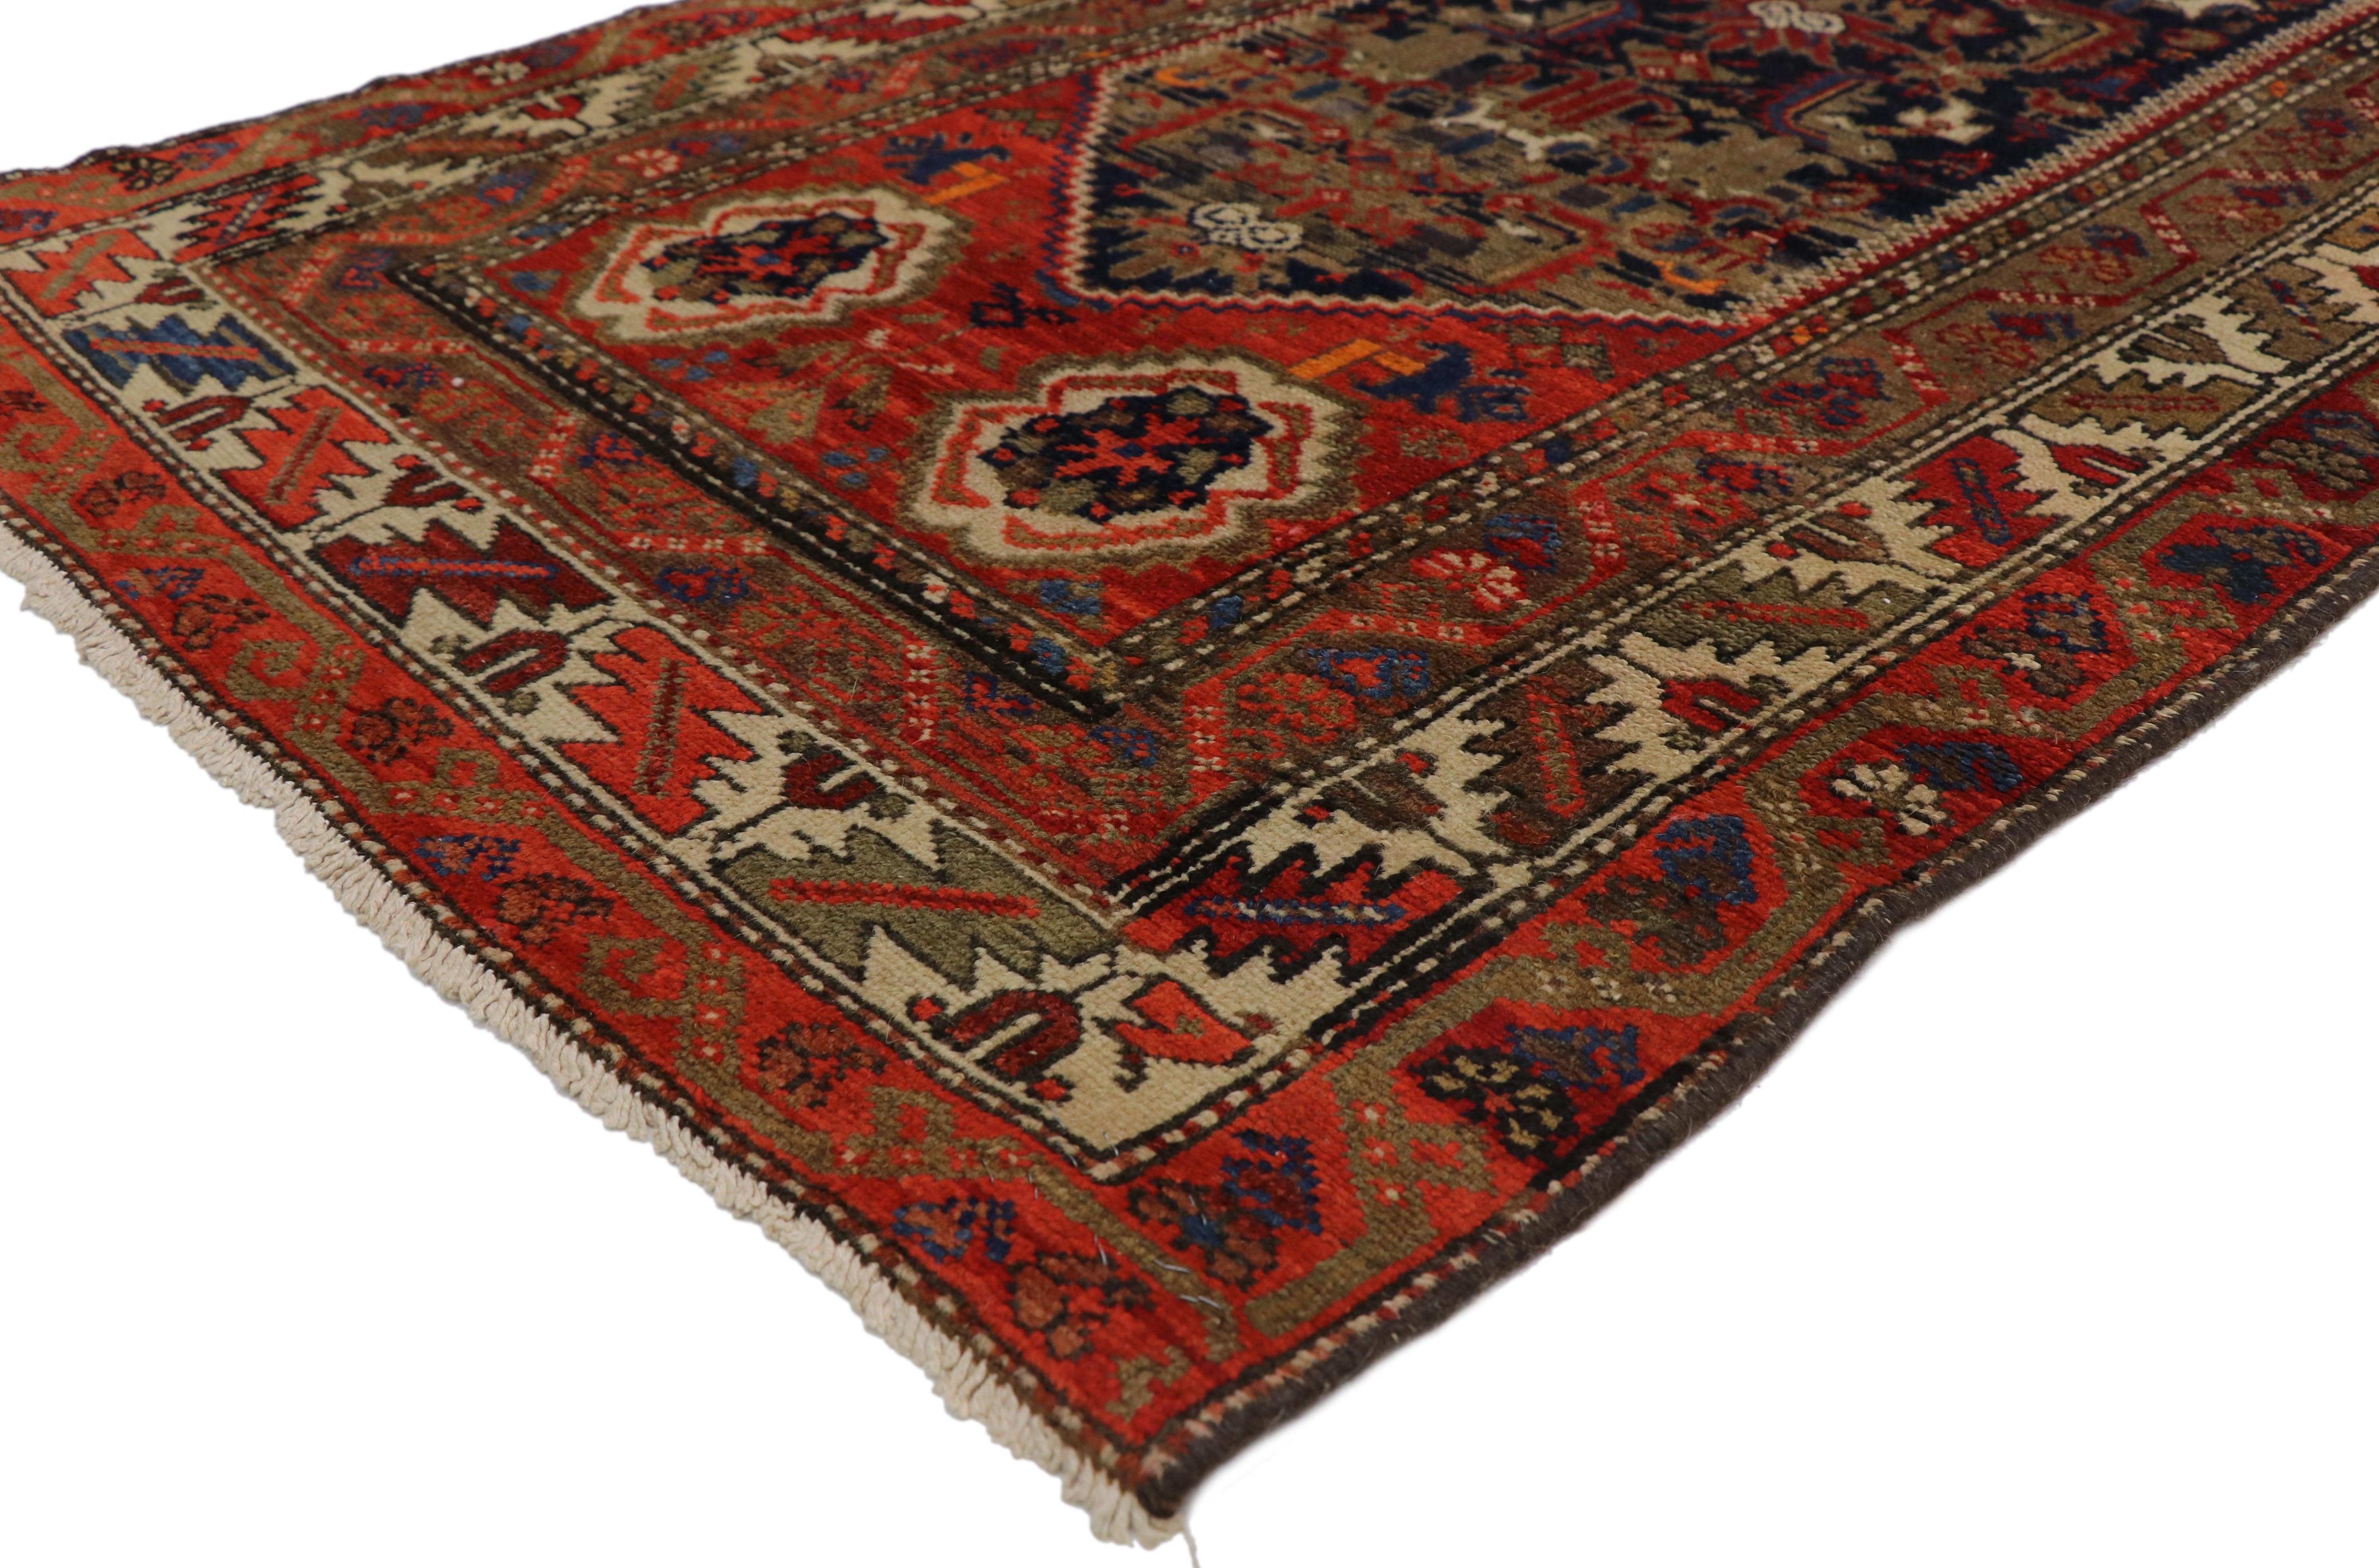 75001 Antique Persian Malayer Extra-Long Hallway Runner with Manor House Tudor Style. Ornate with brilliant colors and rectilinear architectural elements, this hand knotted wool antique Persian Malayer runner beautifully embodies Arts & Craft style.